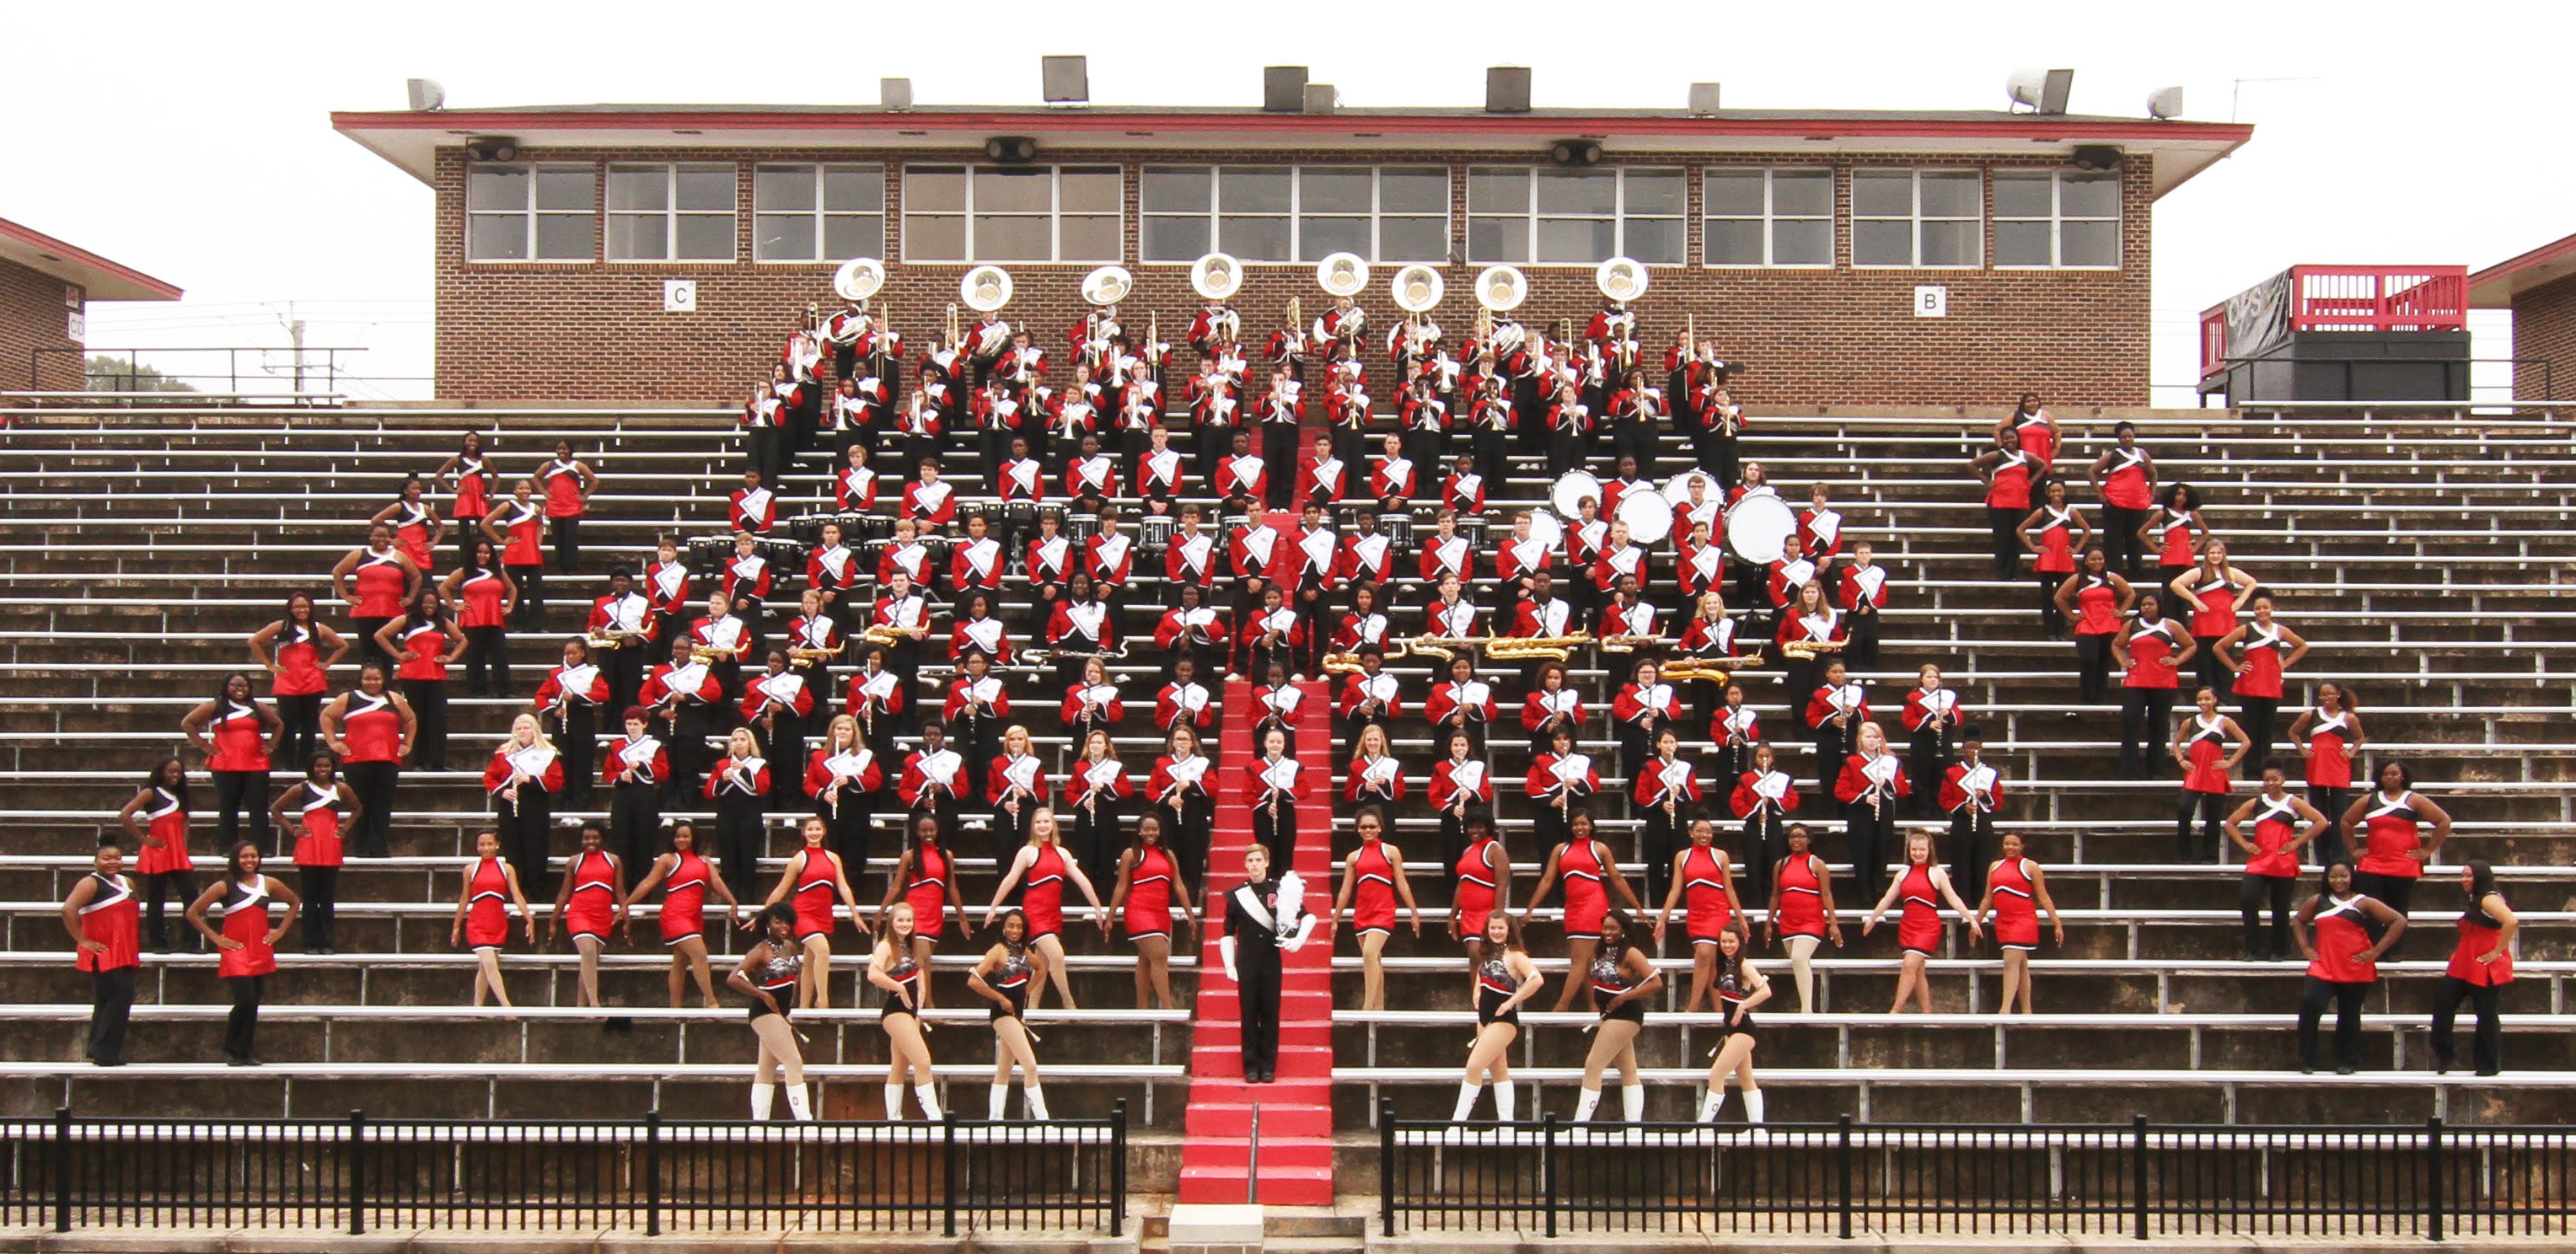 Opelika High School “Spirit of the South” band to perform at TaxSlayer Gator Bowl on Dec. 31